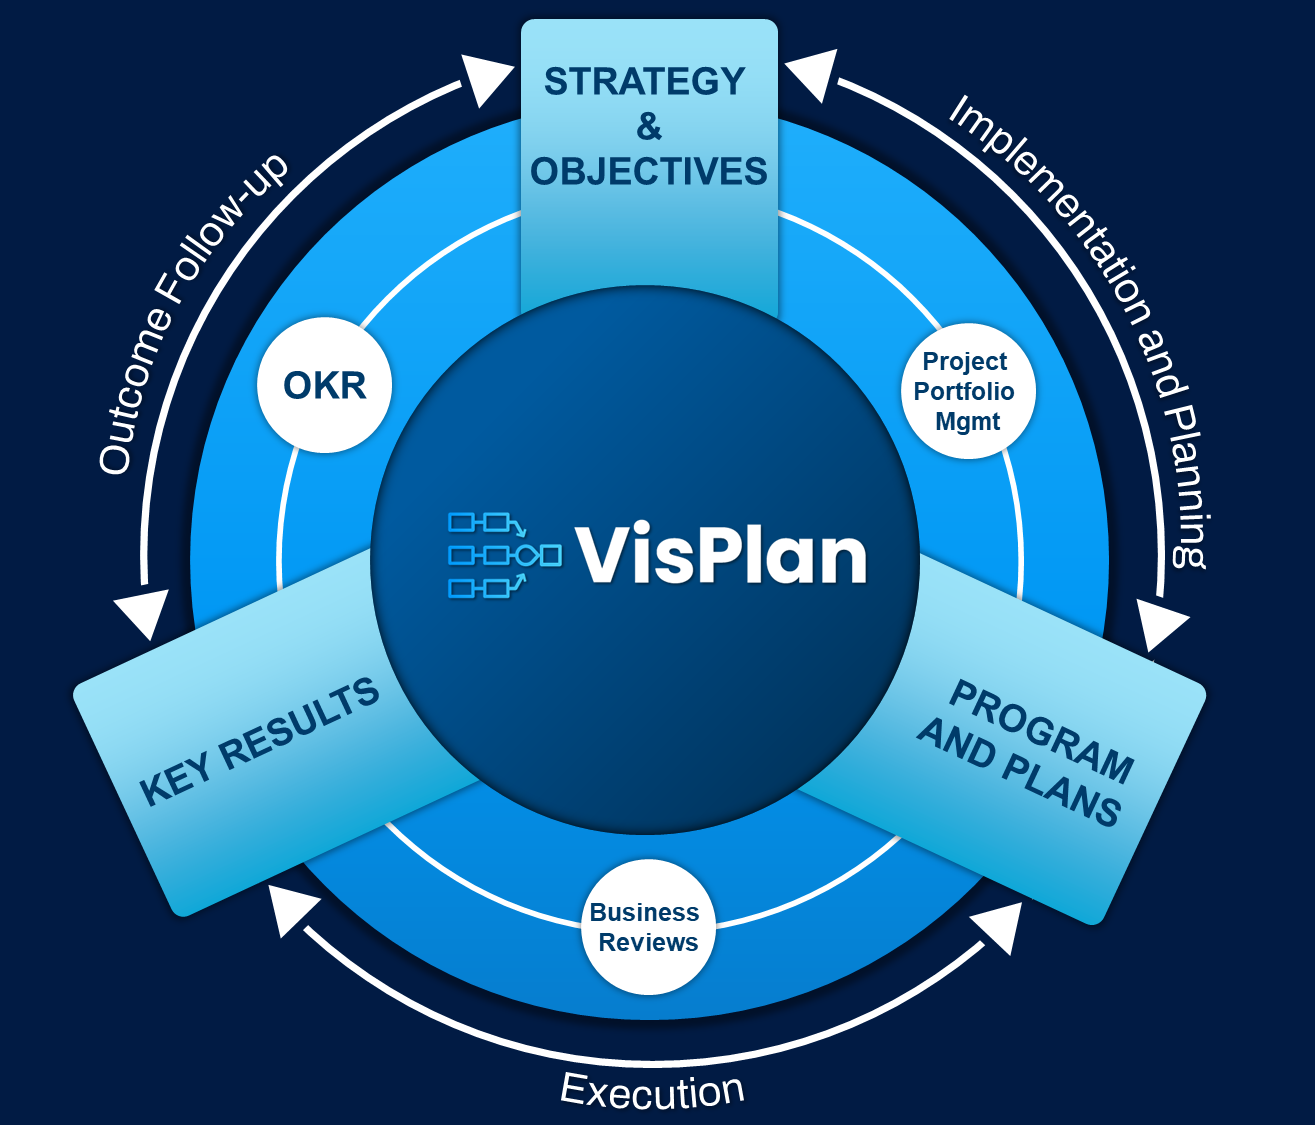 How to improve your business outcomes by visualizing your game plan